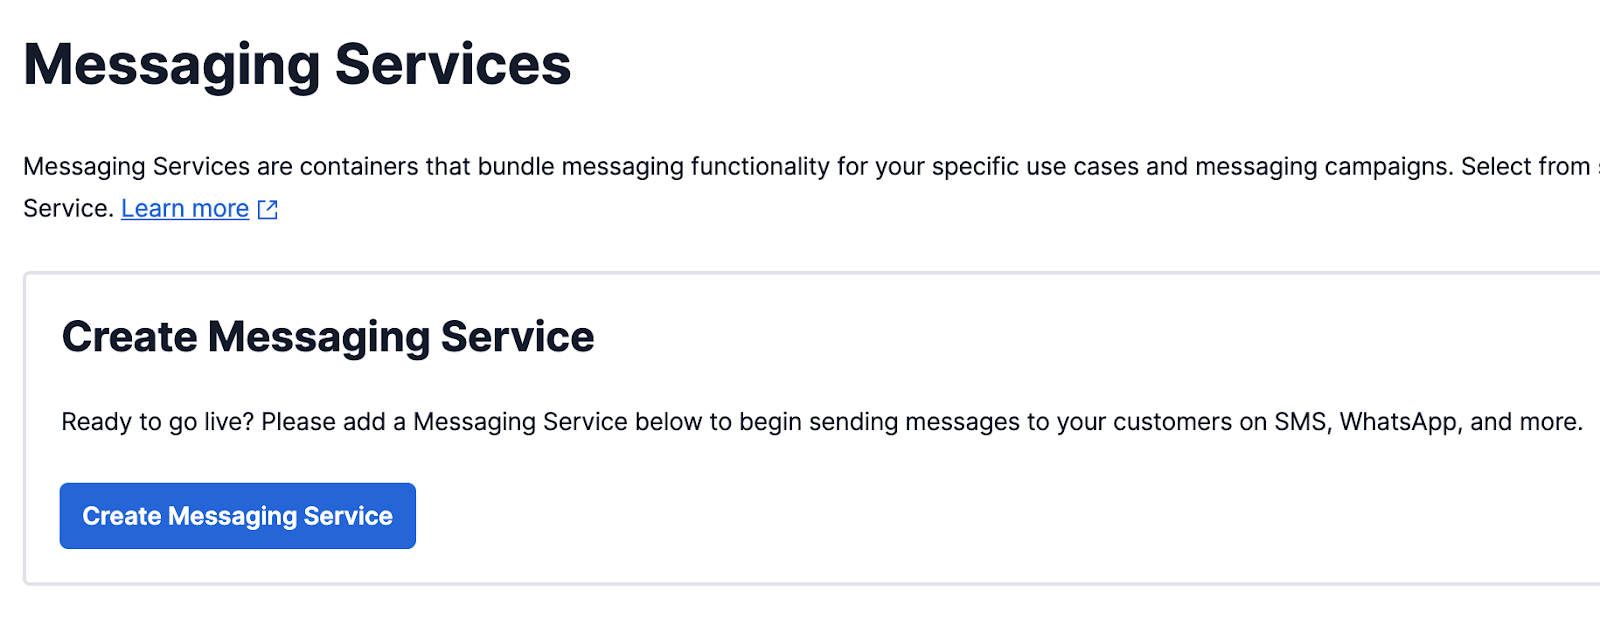 A small section of the Twilio Messaging Services home screen showing where to get started creating a messaging service